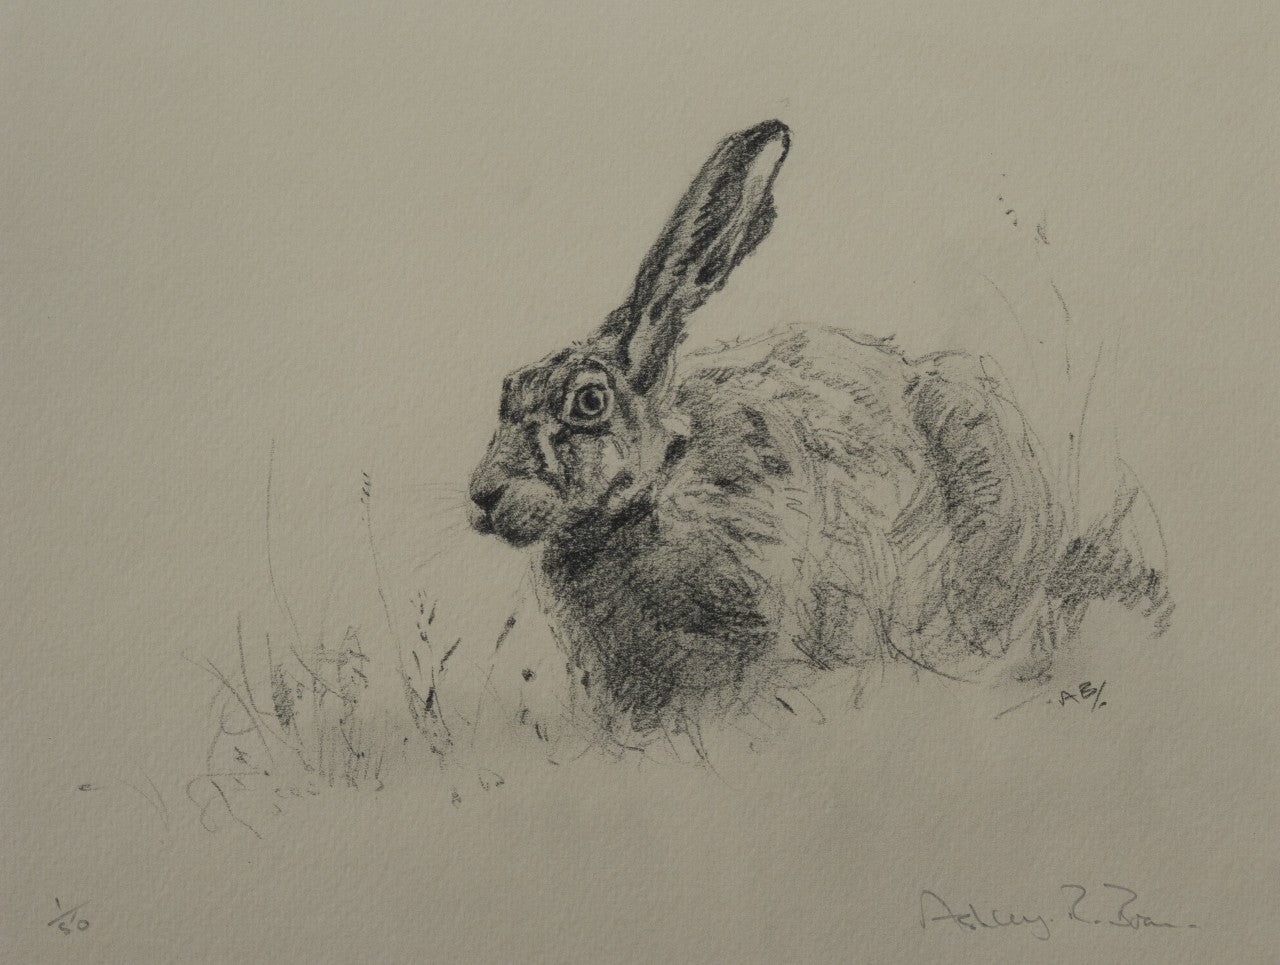 012. 'Brown Hare Sketch' Limited Edition Print (50 only) by Ashley Boon - 10" x 12.75"